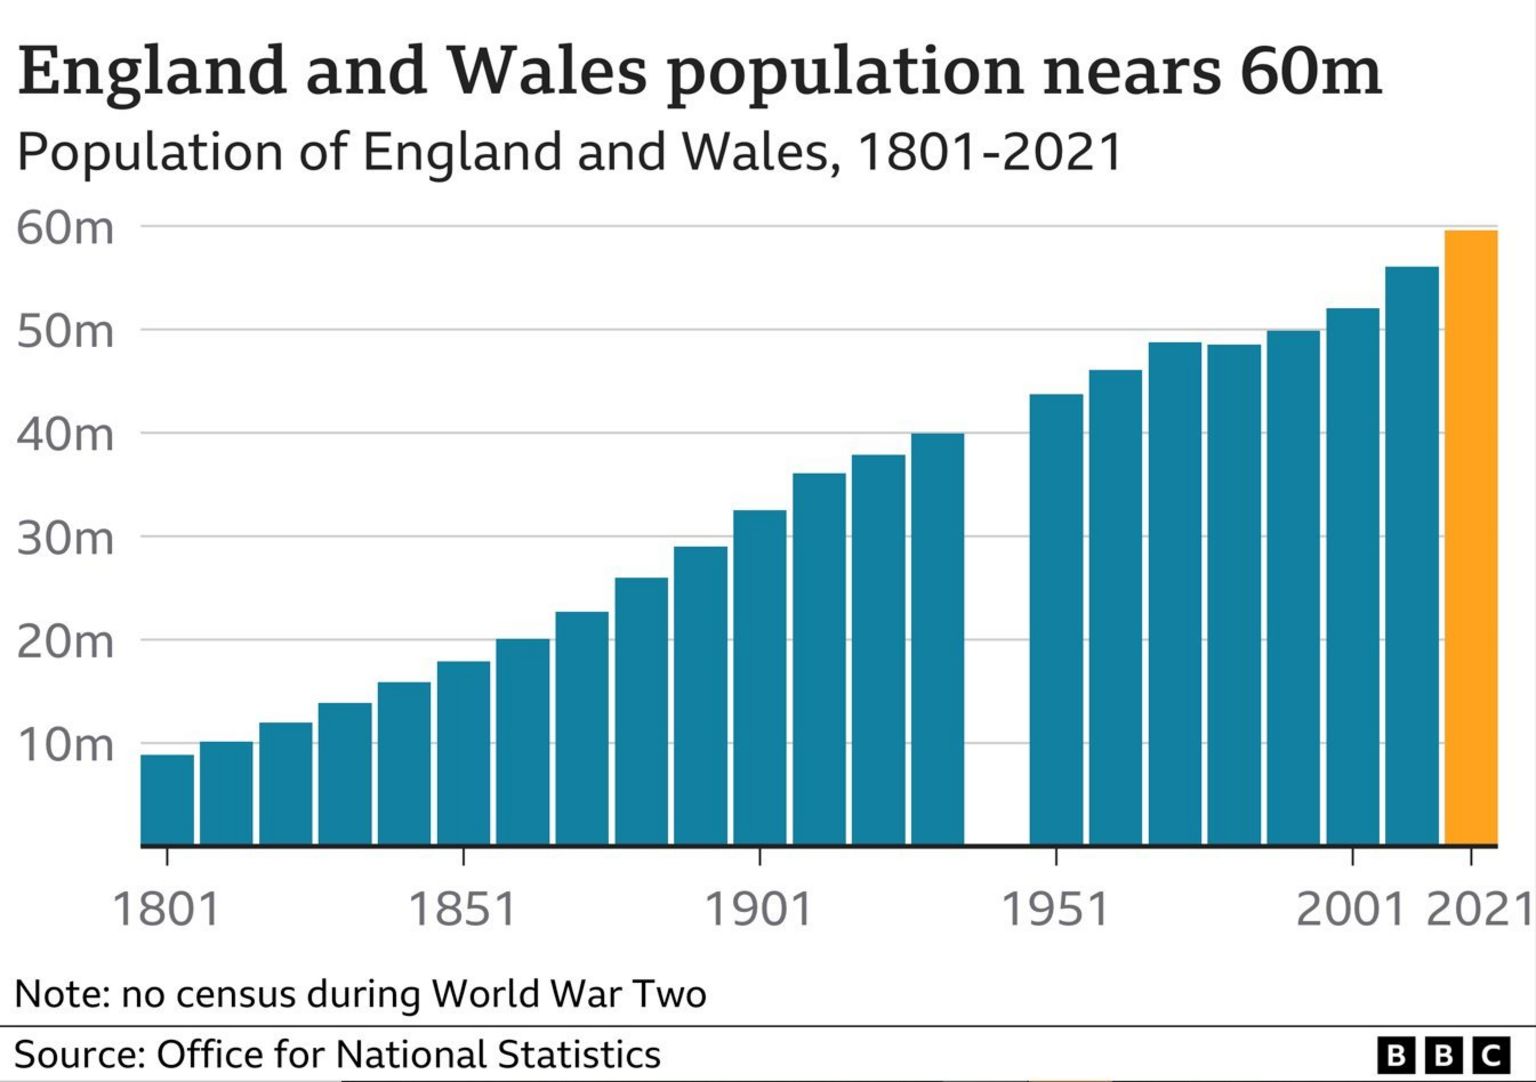 Graph showing population rise in England and Wales since 1801